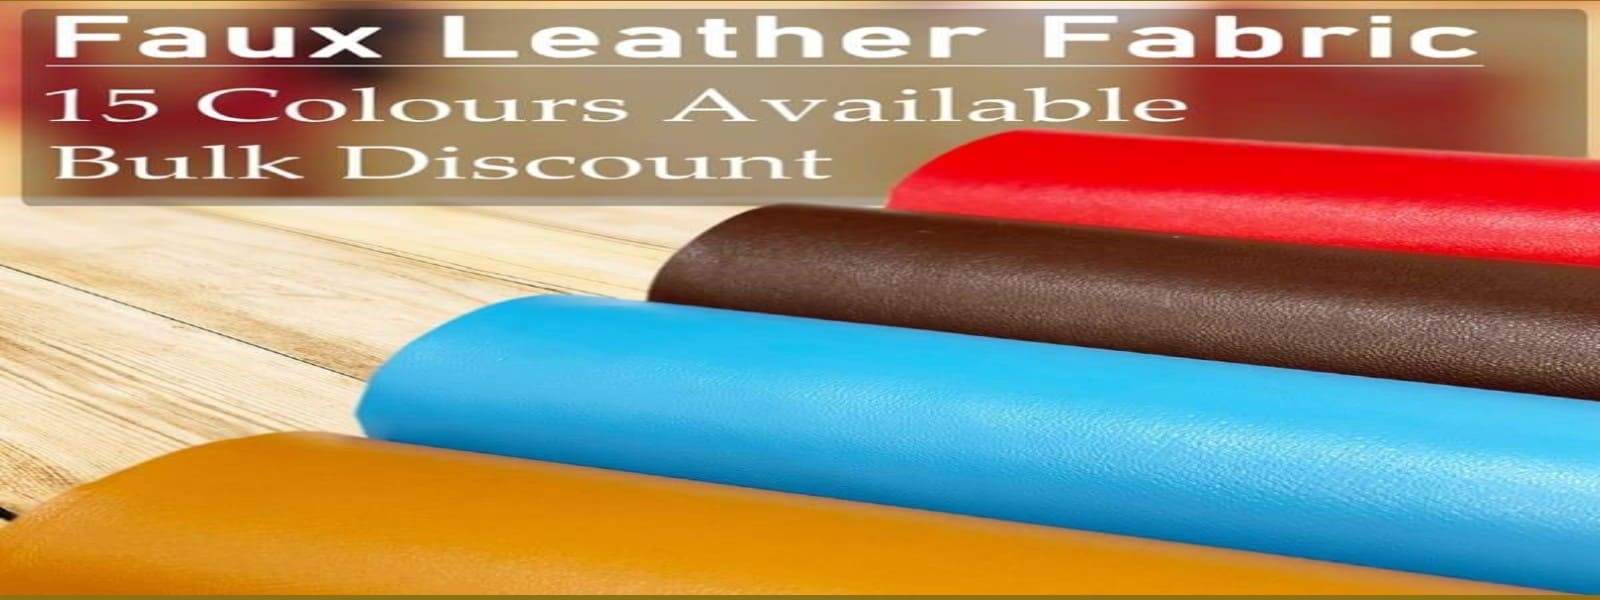 Faux leather/ PU leather / Synthetic leather / Upholstery & crafts. What is PU leather and what are they used for?